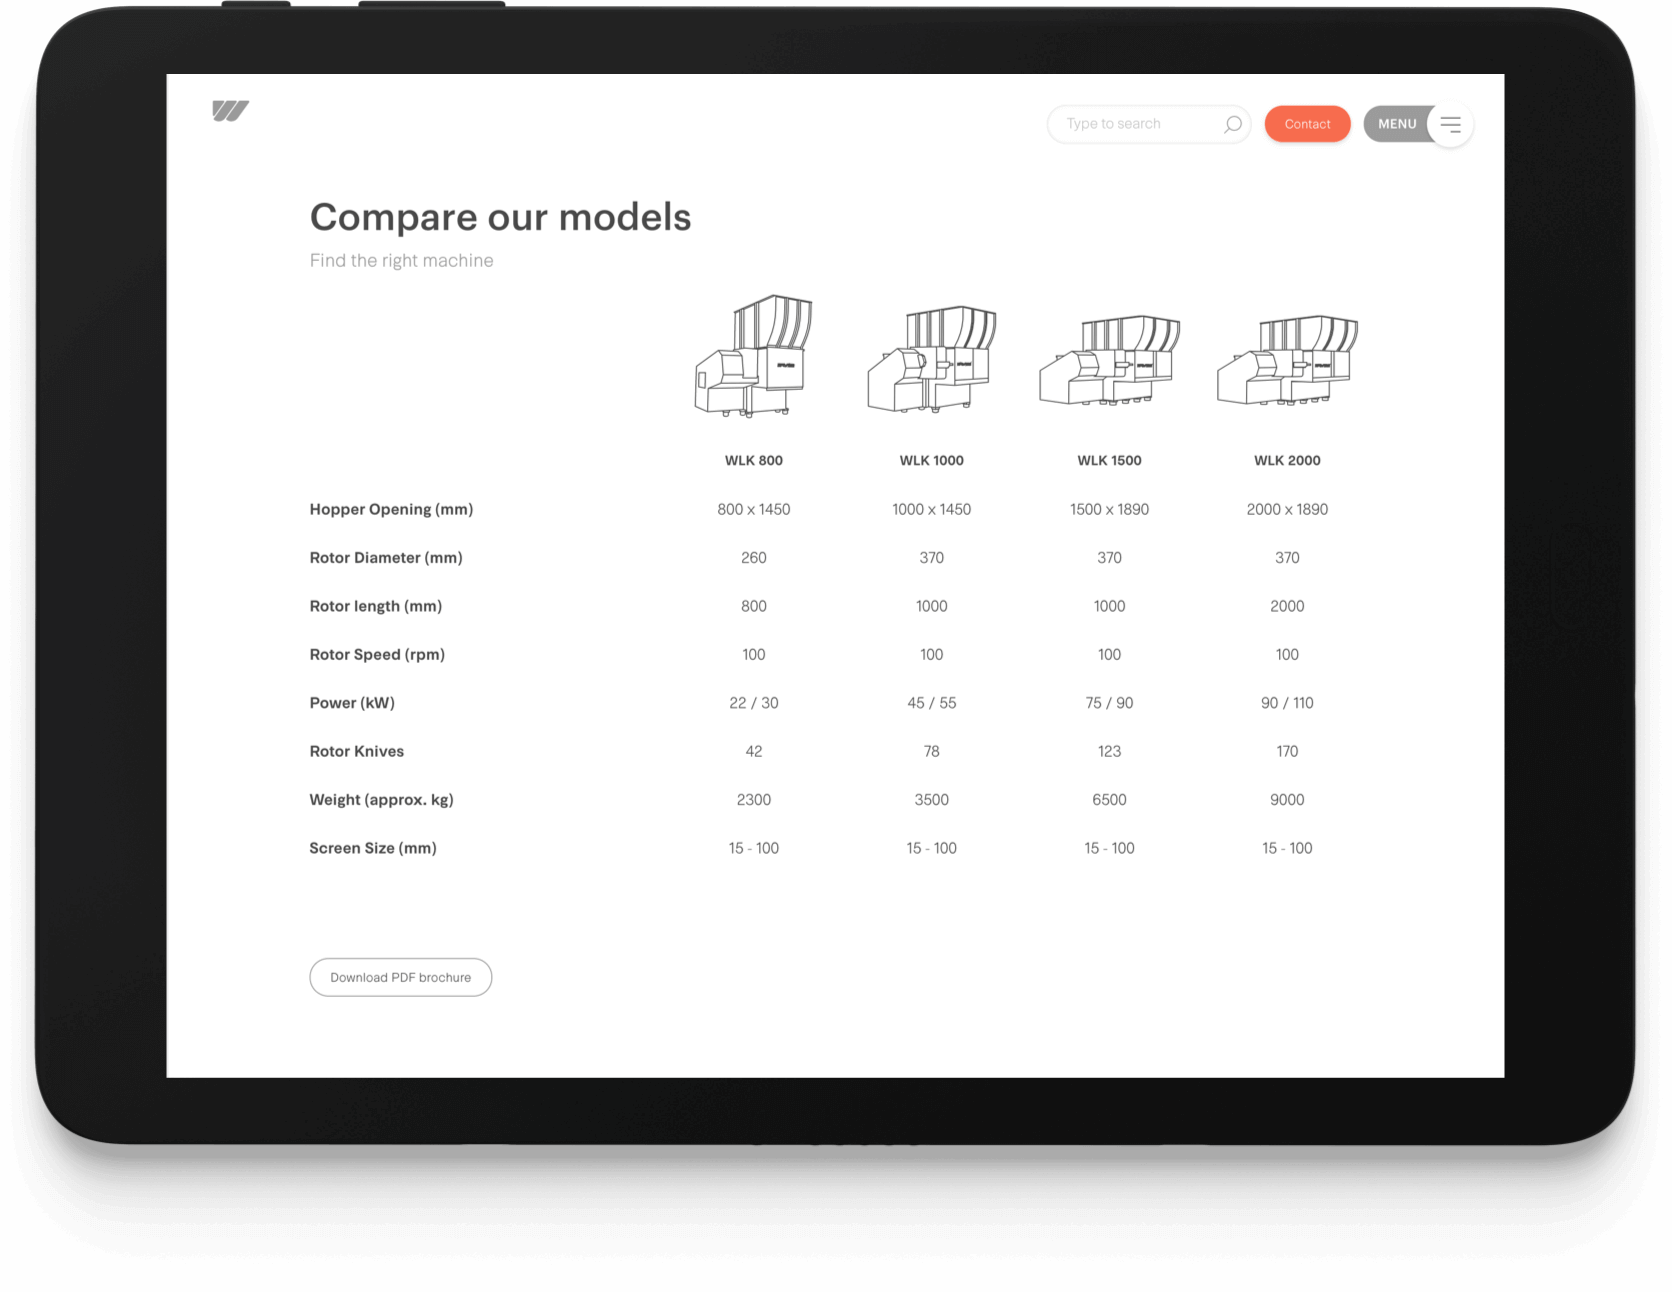 Compare Weima machine models shown on tablet